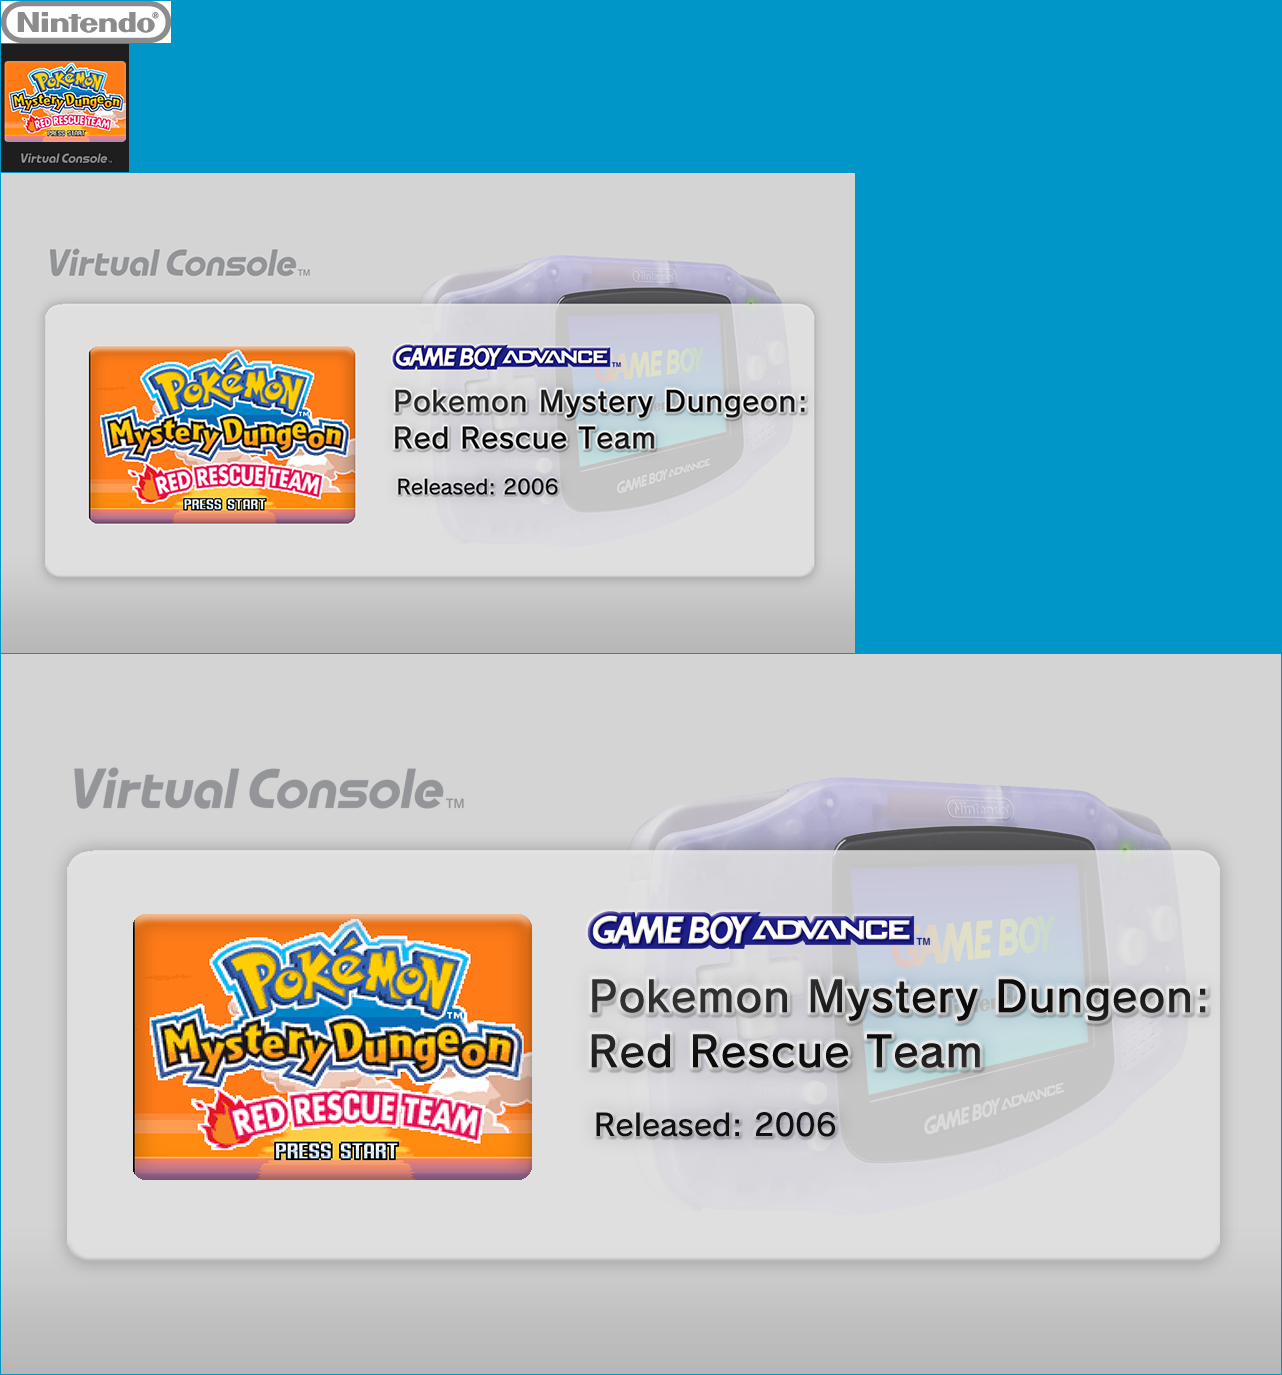 Virtual Console - Pokémon Mystery Dungeon: Red Rescue Team